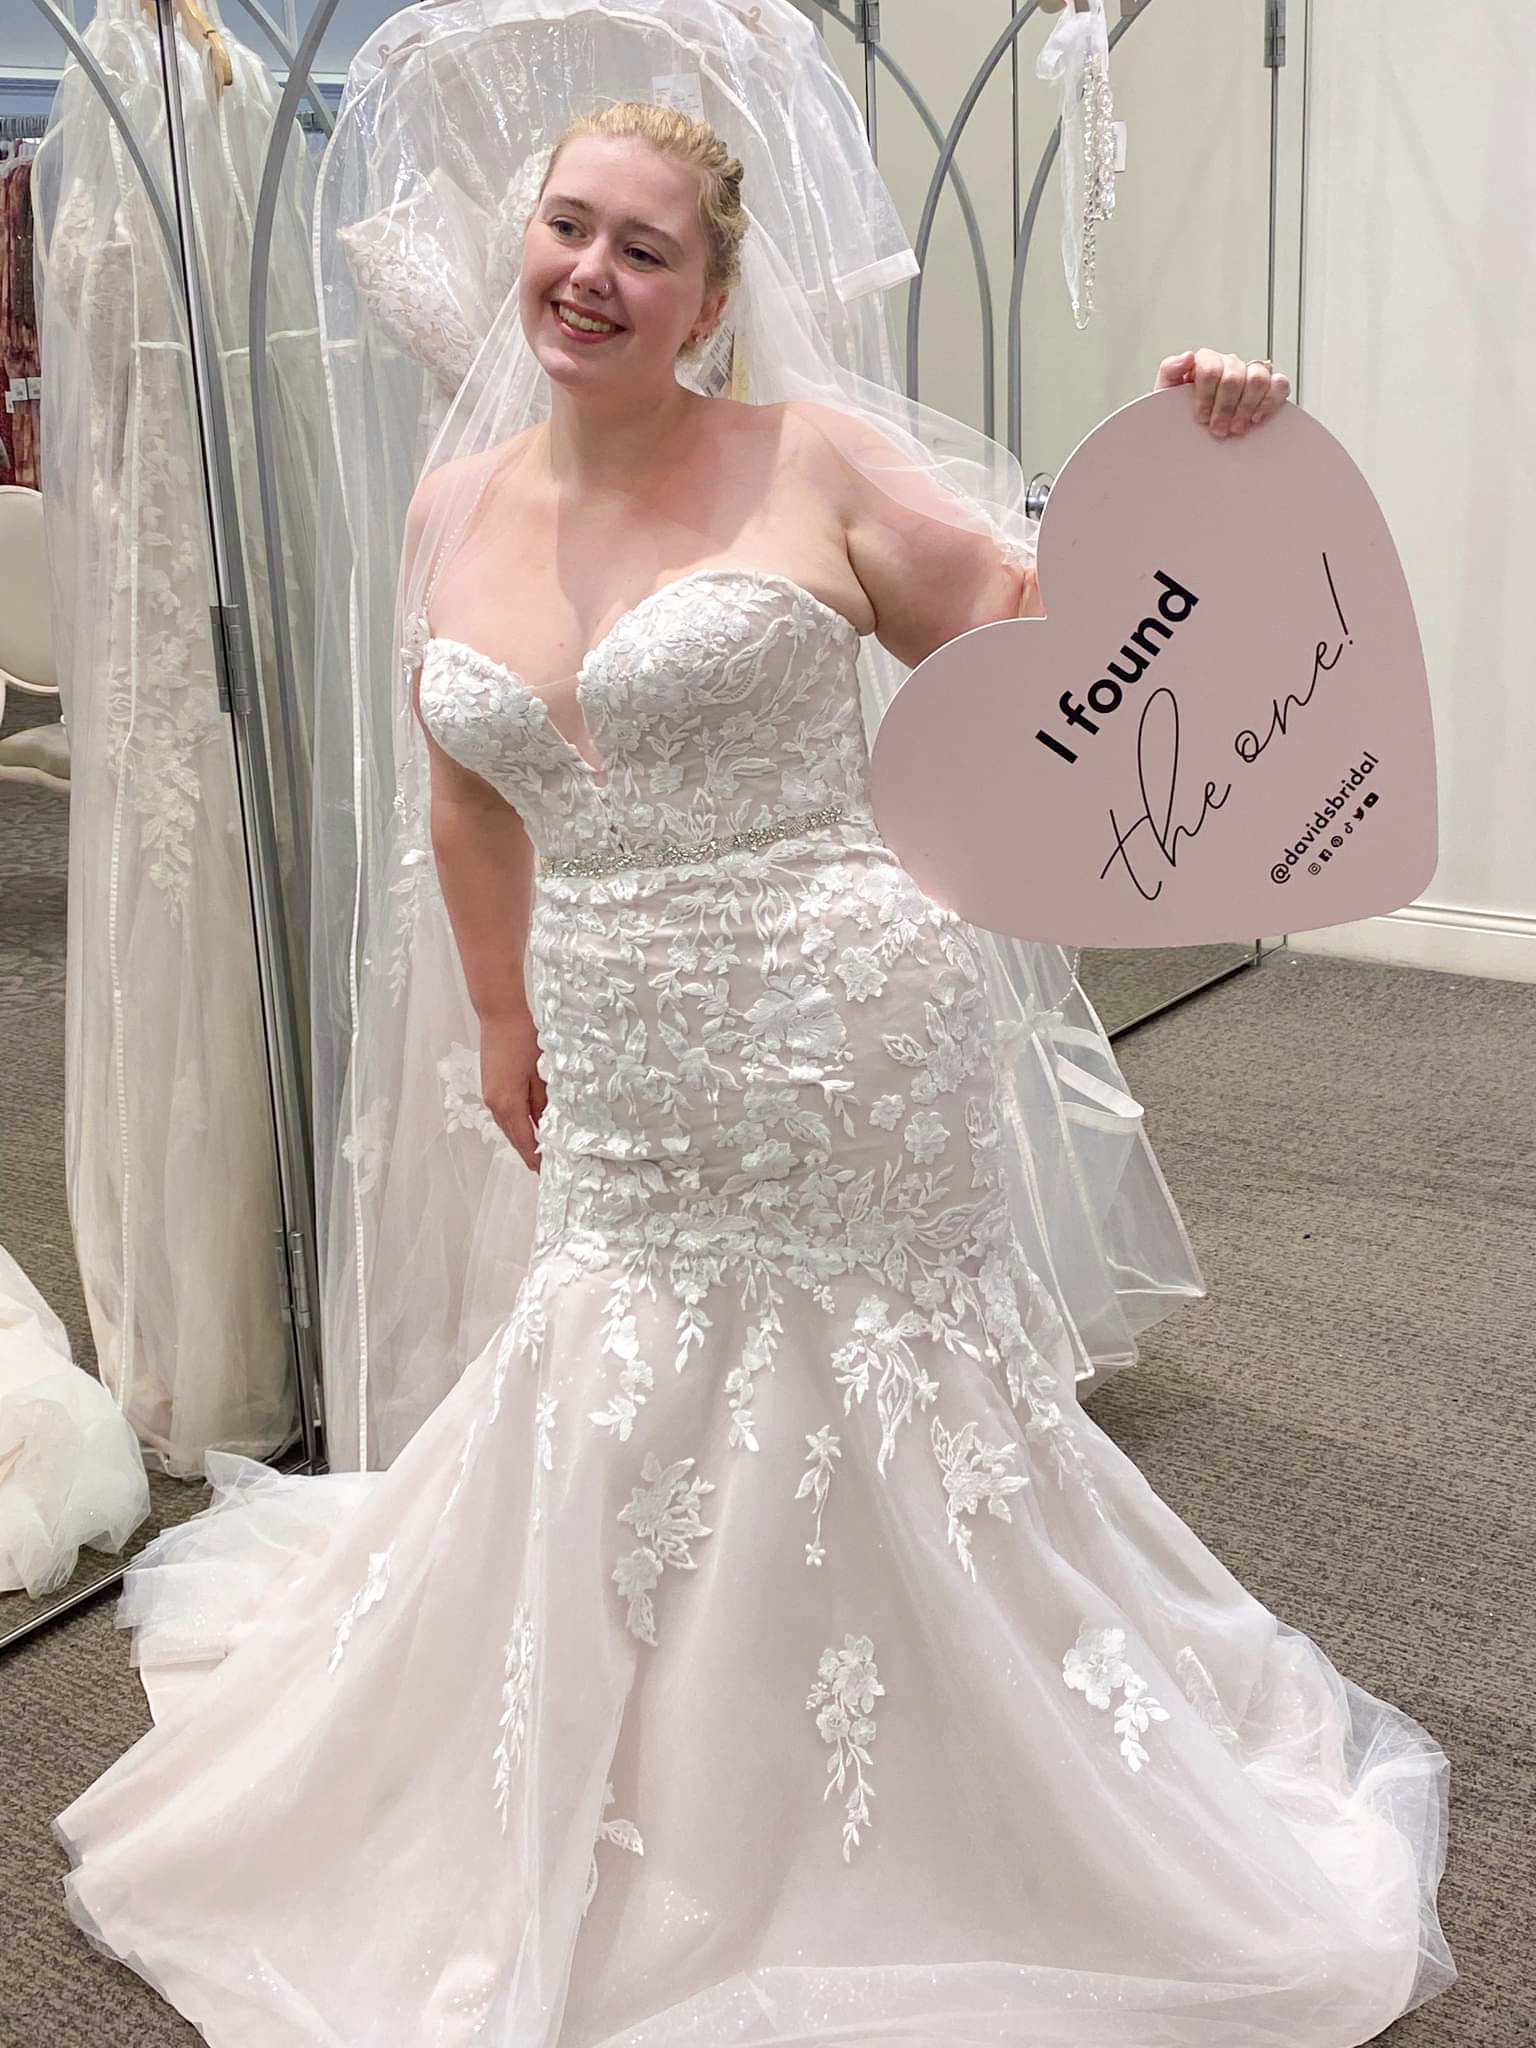 Yes, you can make an appointment or walk in at David's Bridal